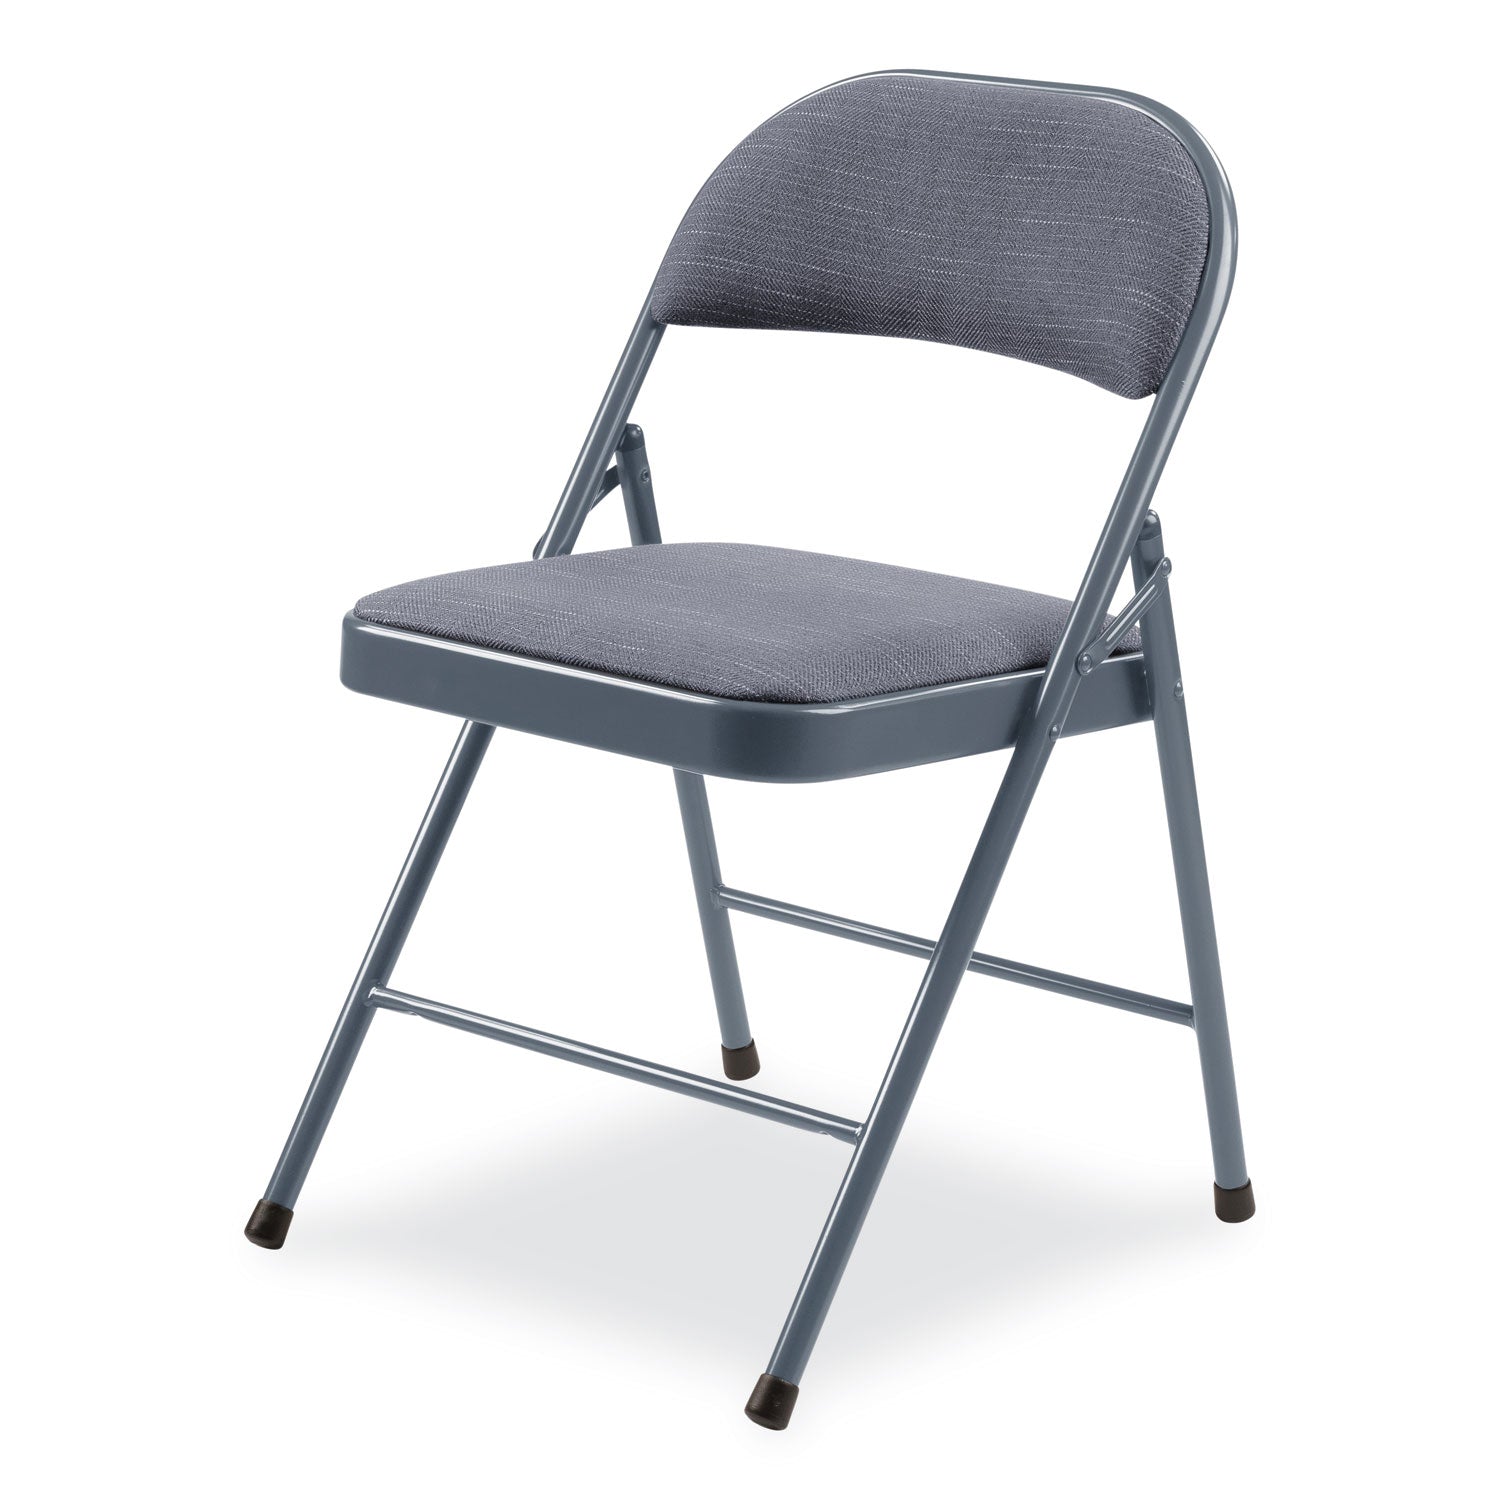 970-series-fabric-padded-steel-folding-chair-supports-250-lb-1775-seat-ht-star-trail-blue-4-ctships-in-1-3-bus-days_nps974 - 3